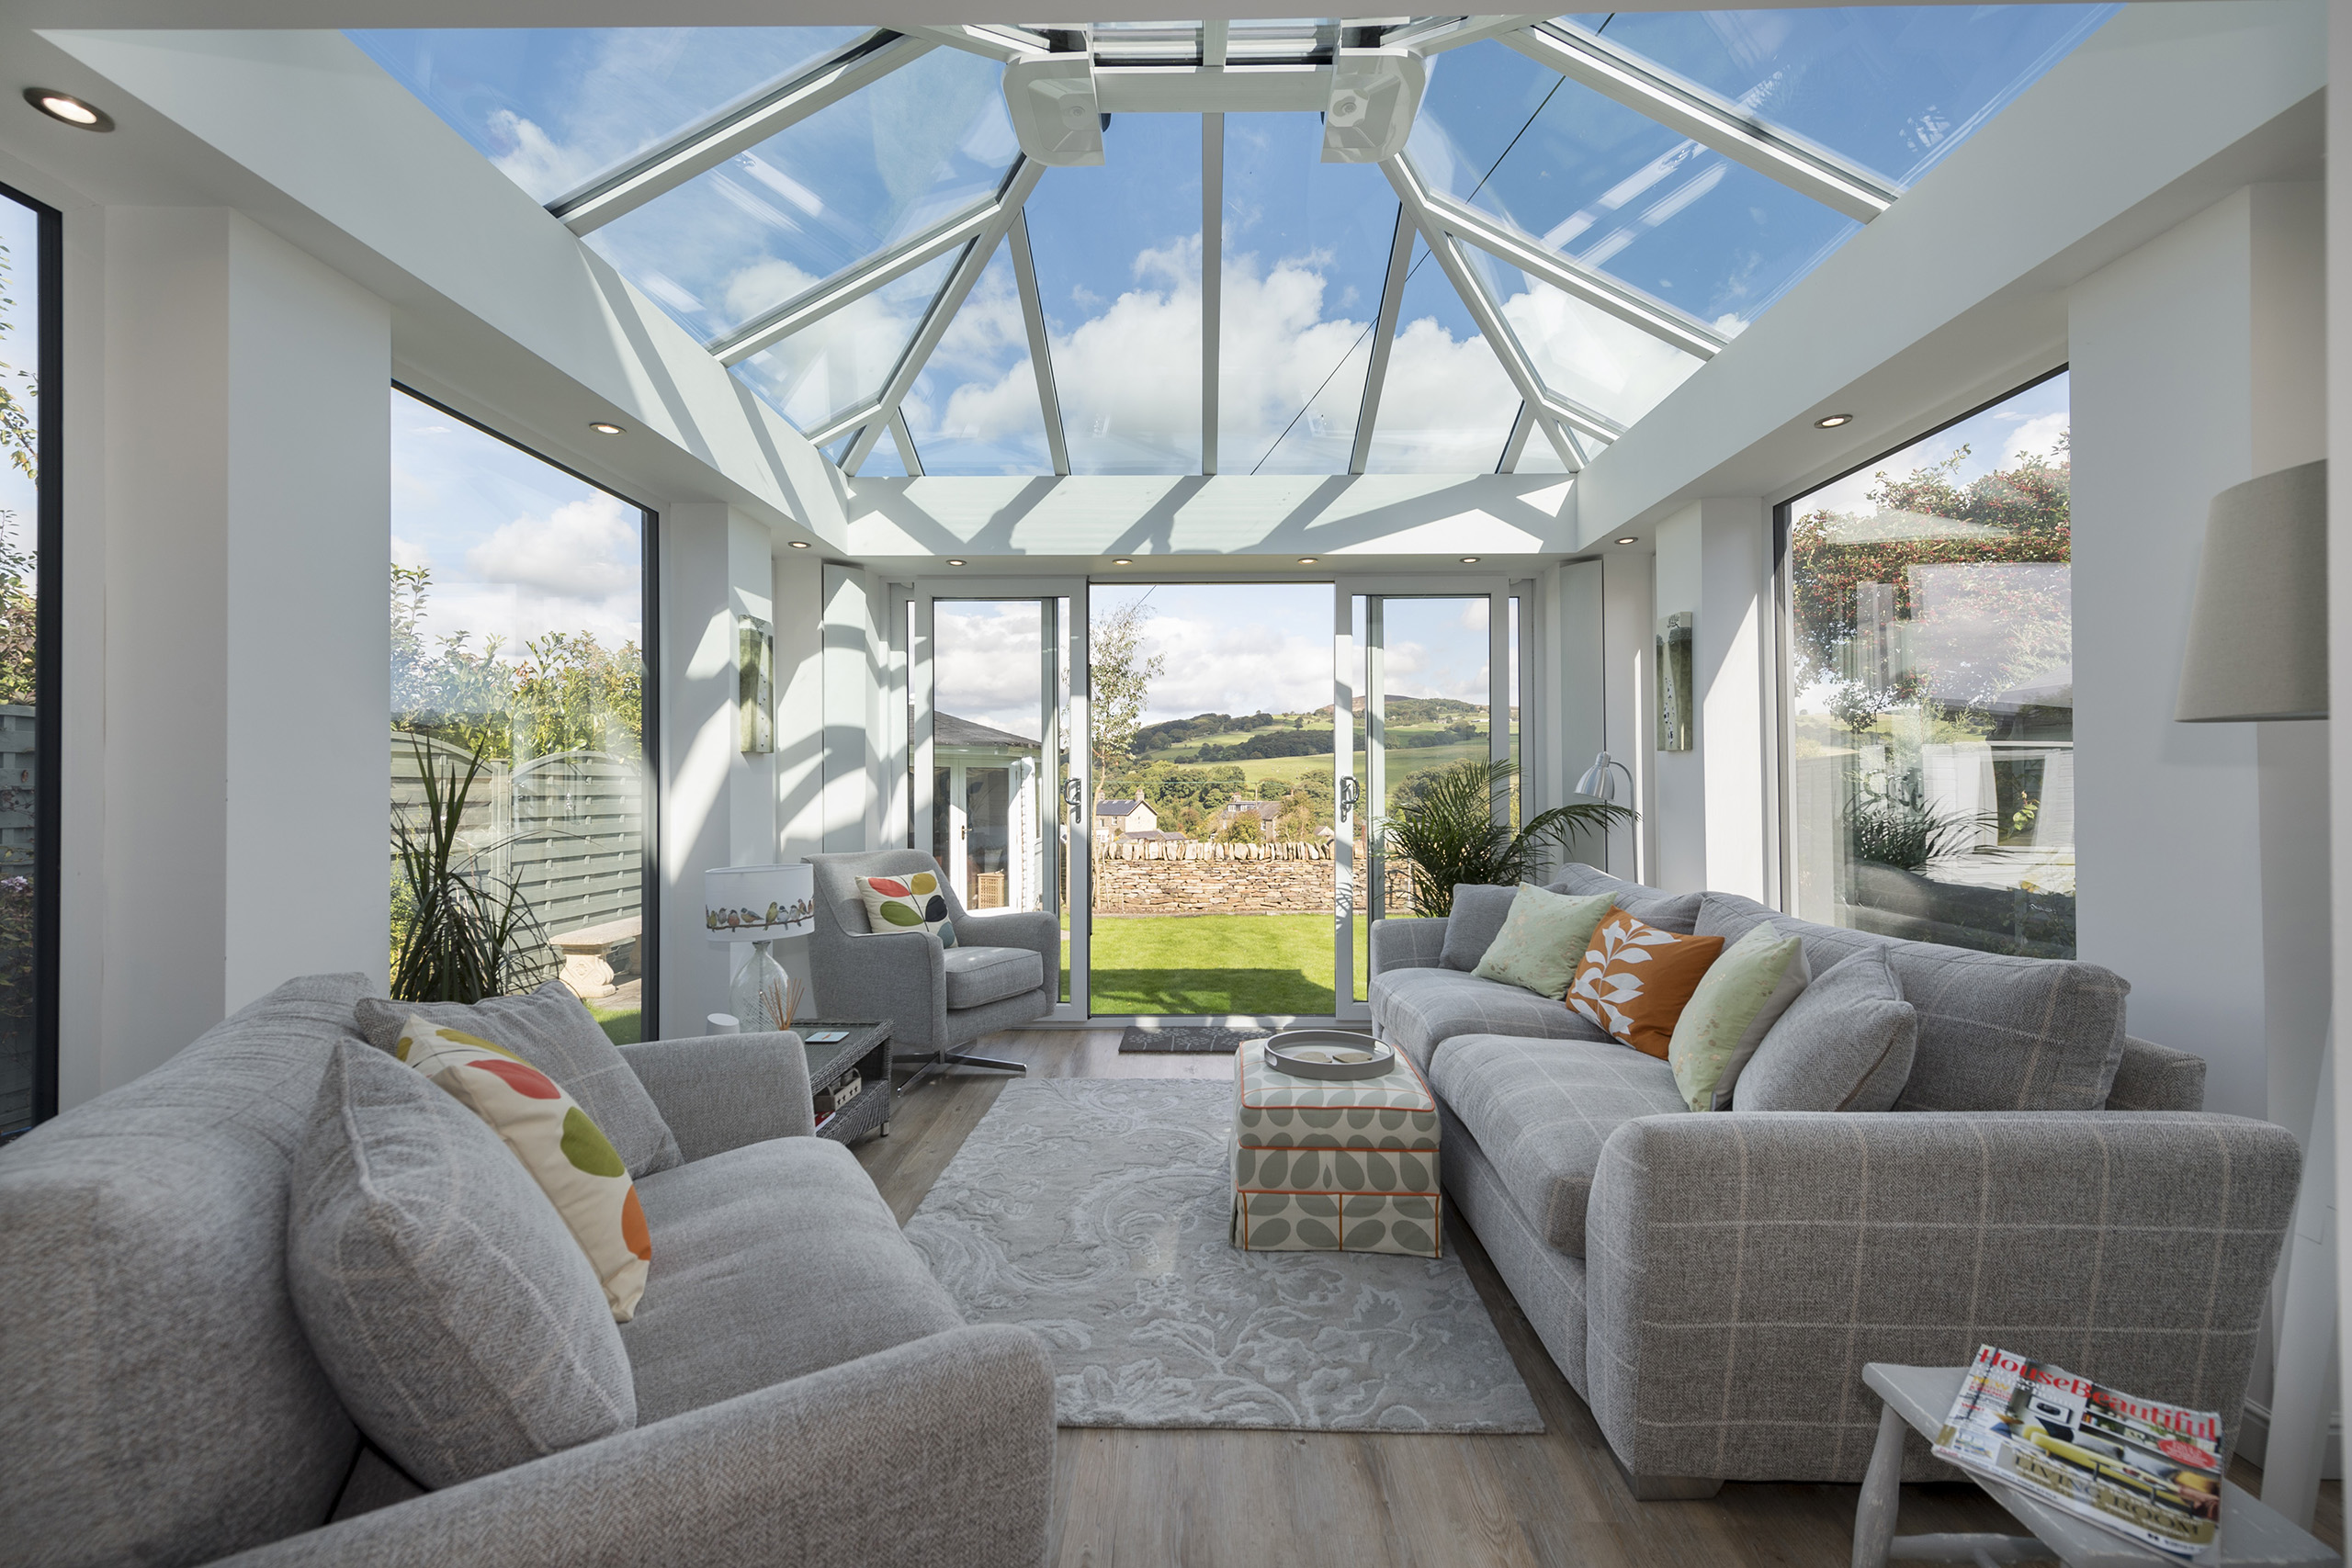 6 Ways to Make Your Conservatory Energy Efficient This Autumn